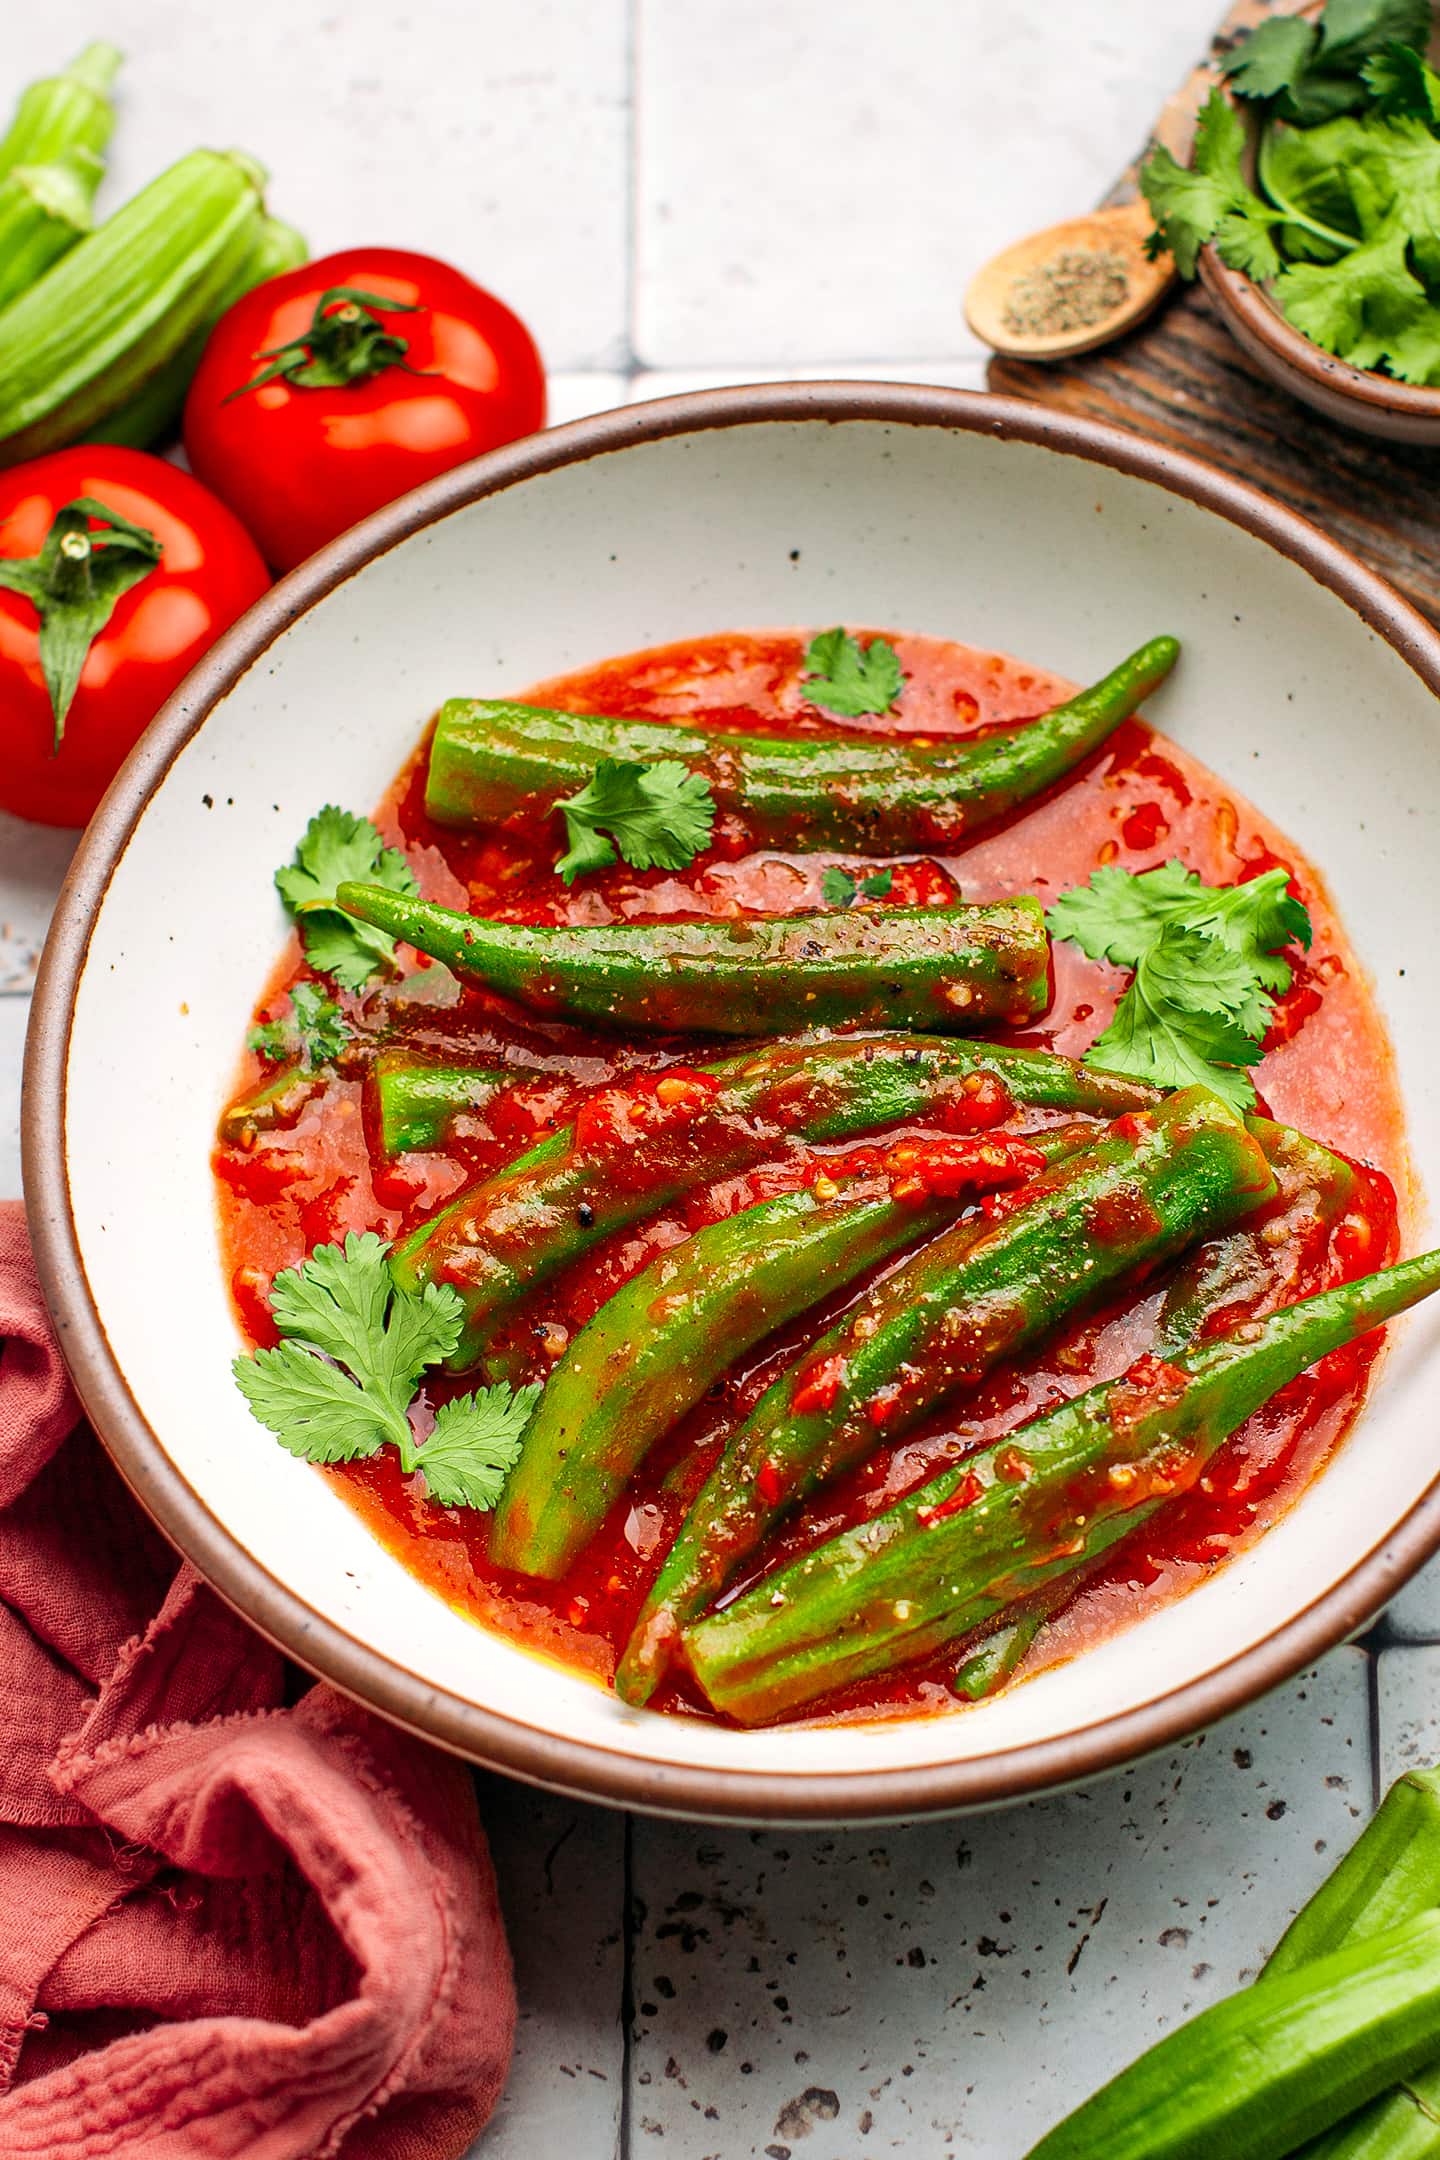 Okra pods and tomato sauce topped with cilantro in a bowl.